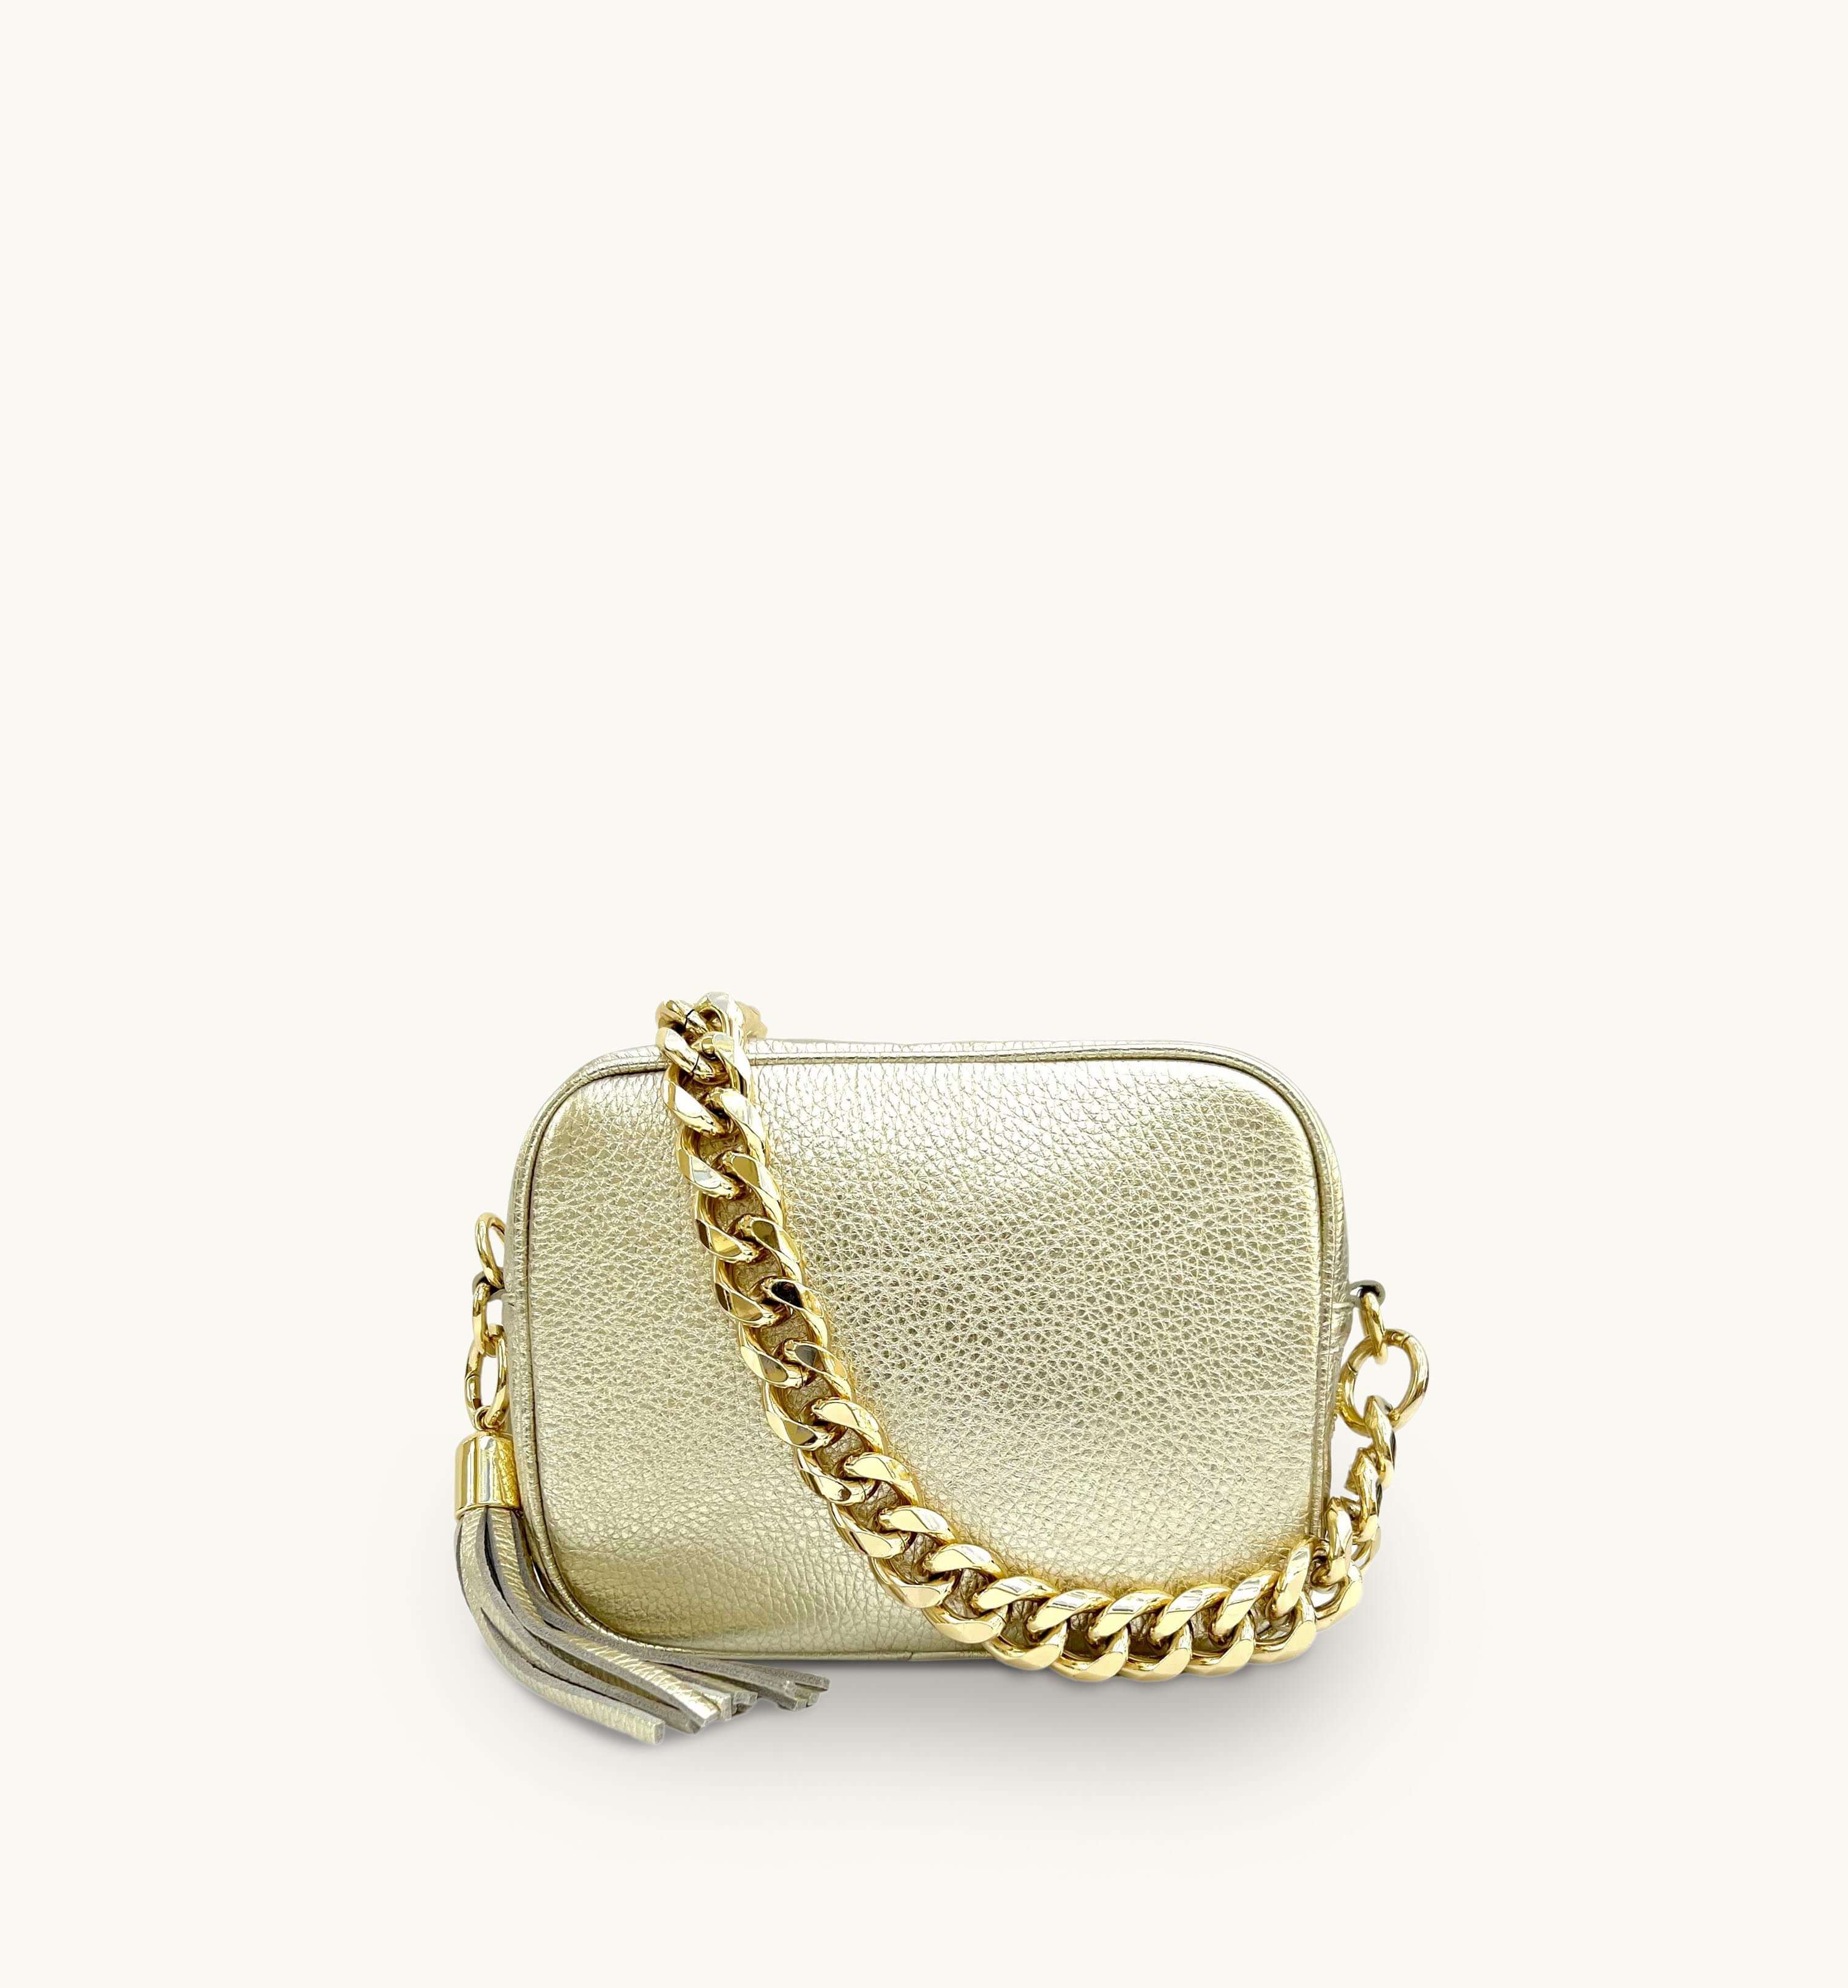 The Bloxsome Black Leather Crossbody Bag With Gold Chain Strap